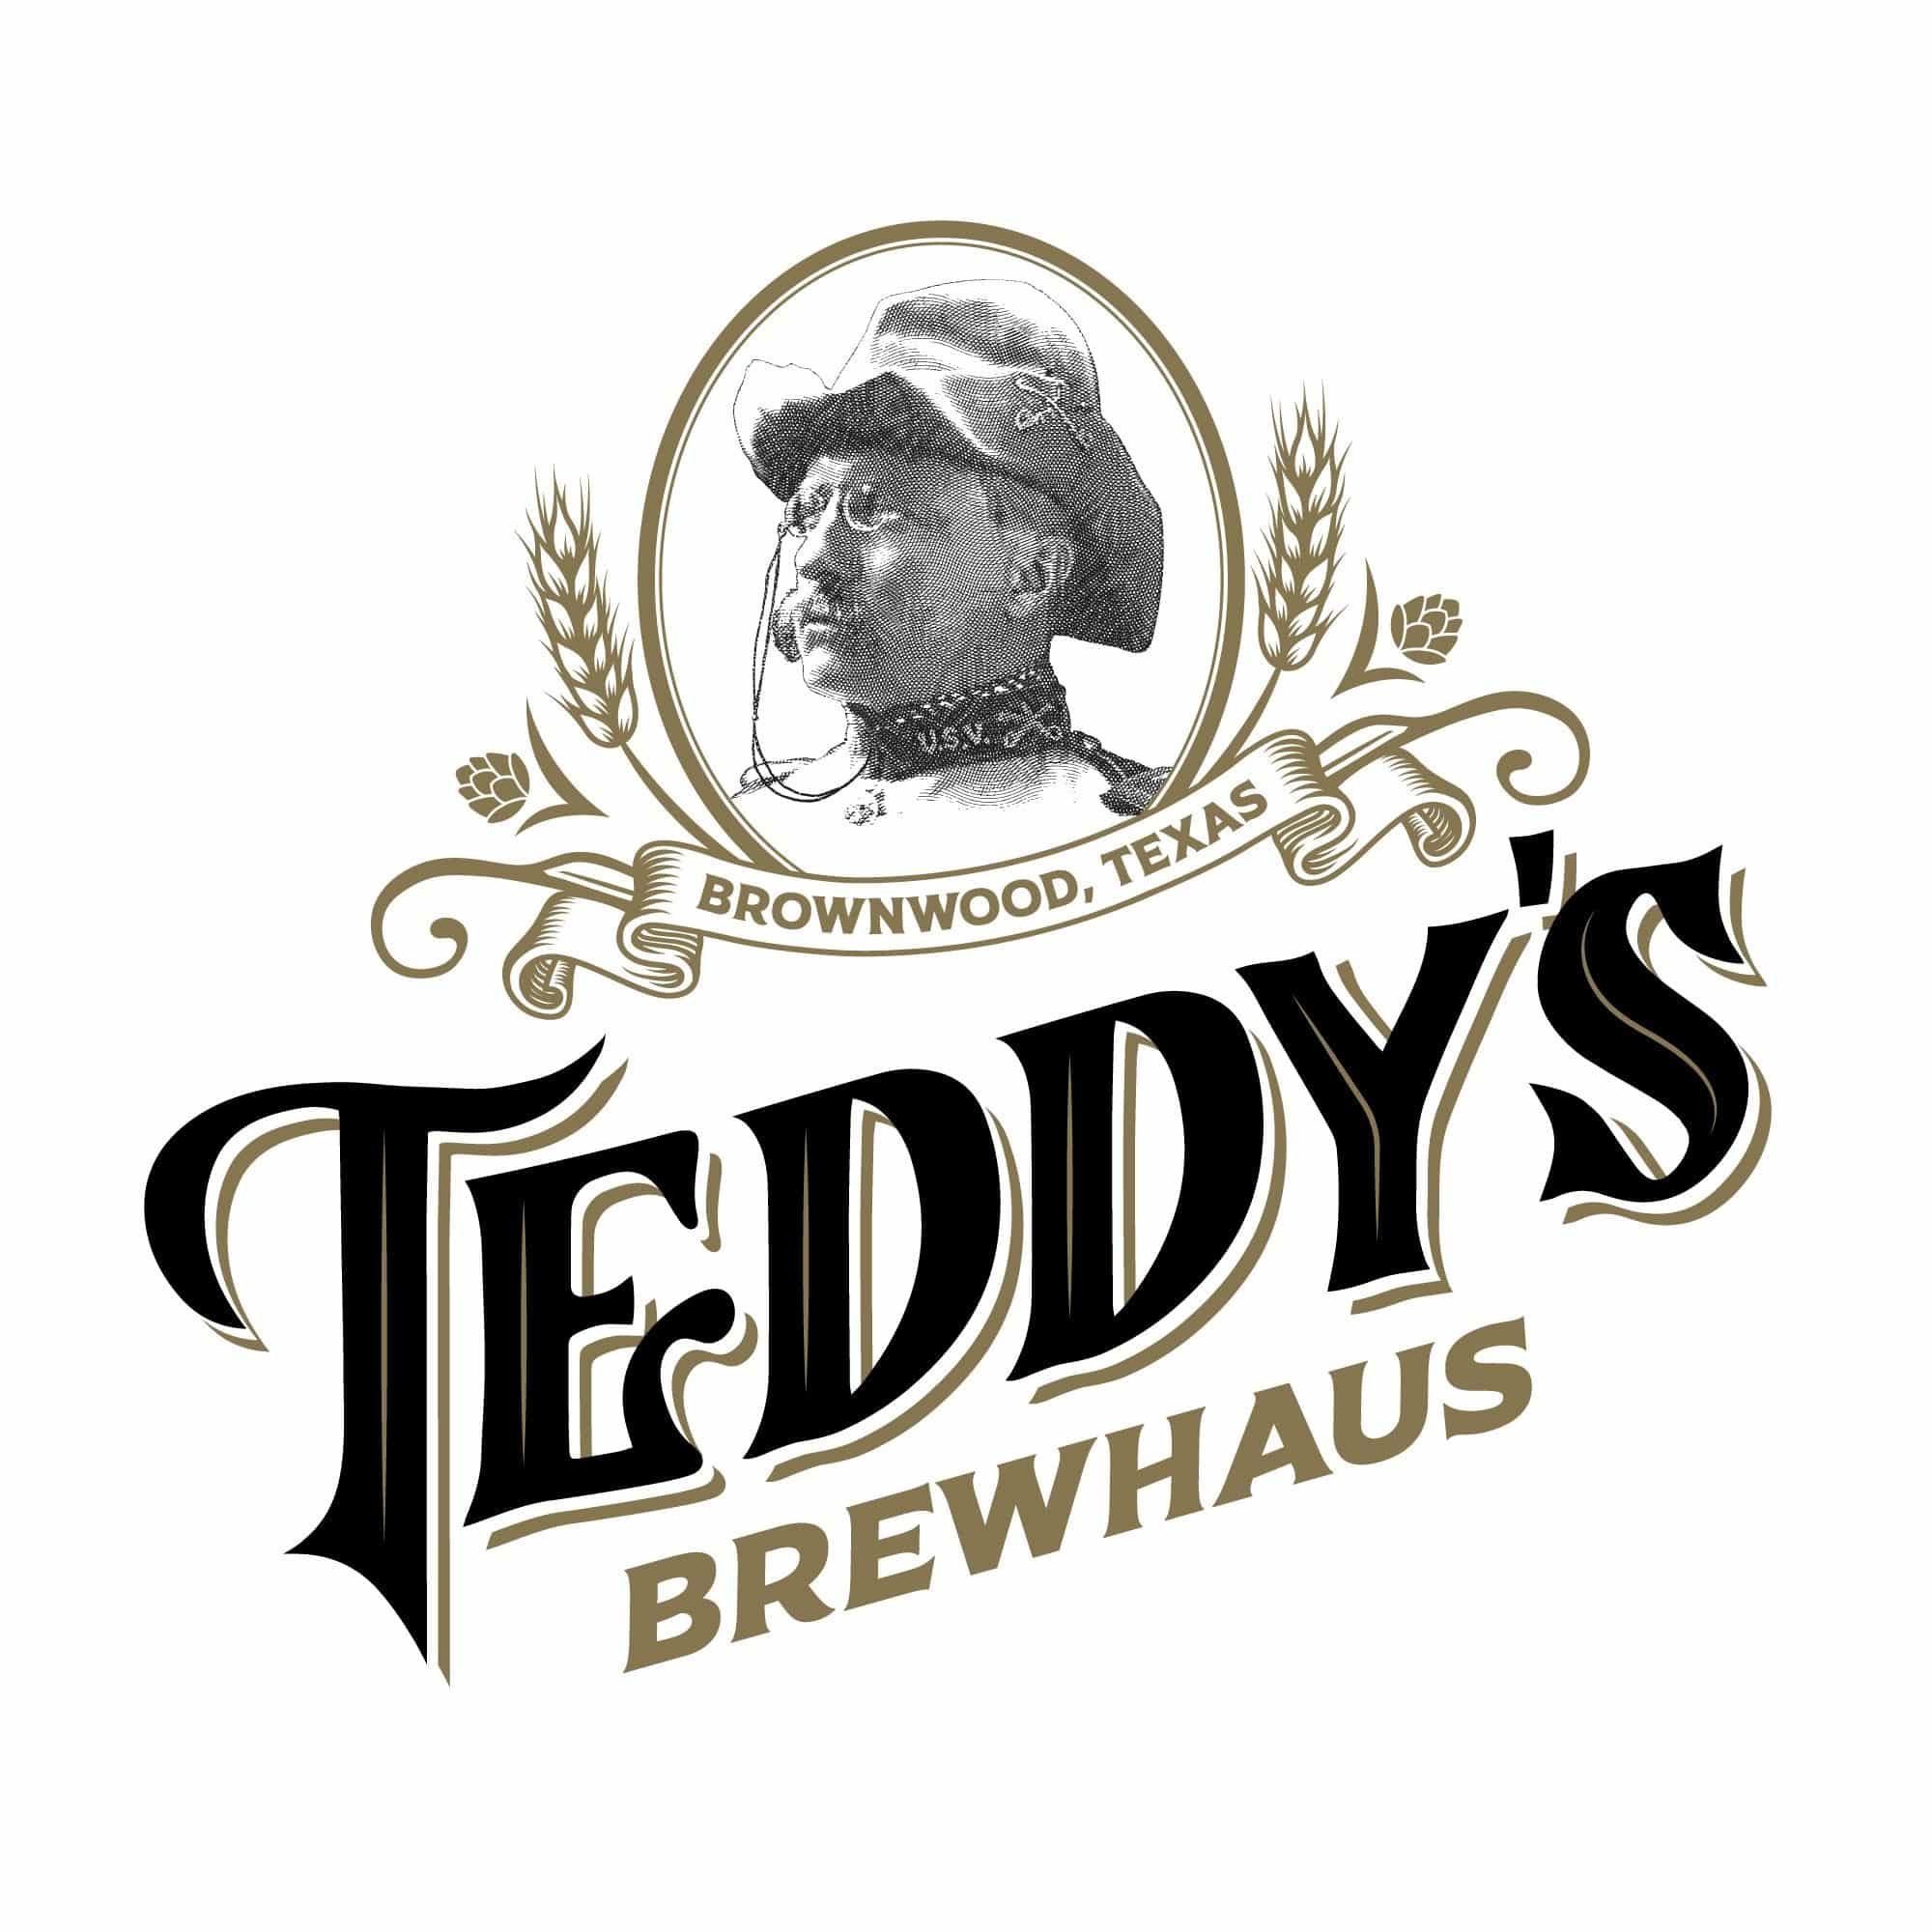 Teddy’s Brewhaus